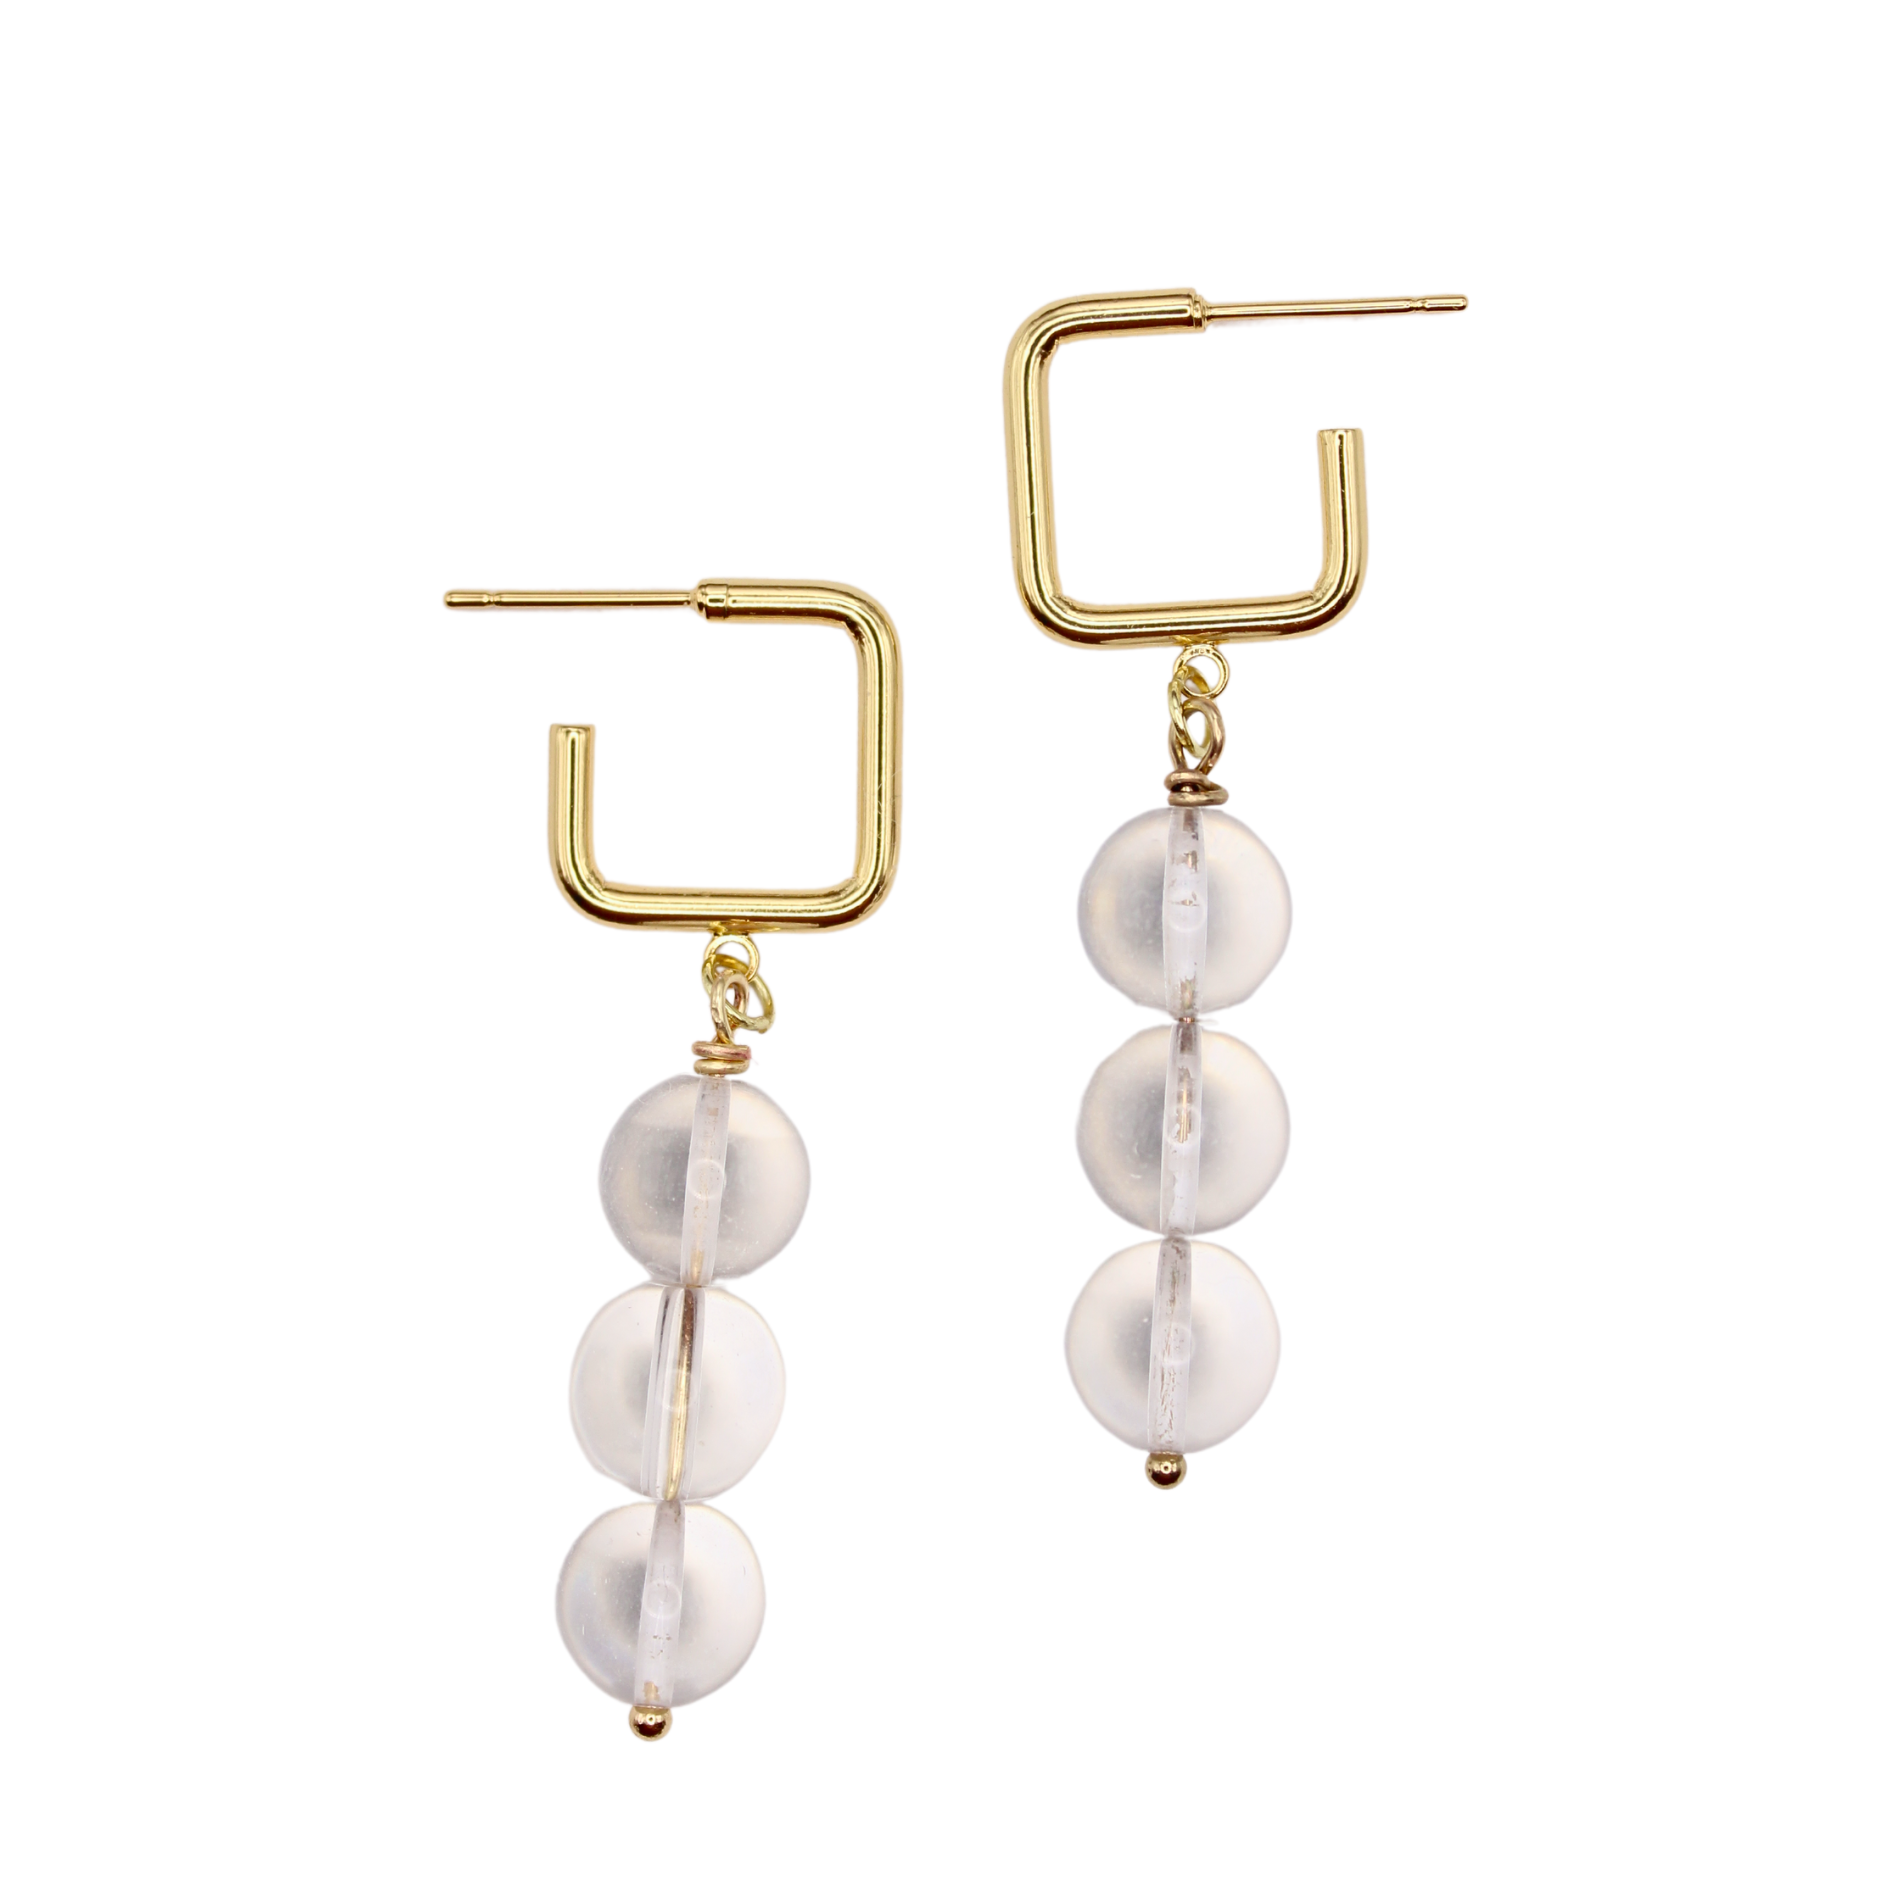 The perfect modern staple, the Imogen square hoops are a classic and minimal staple piece. They are made with hypoallergenic nickel free square hoops and glass beads. 